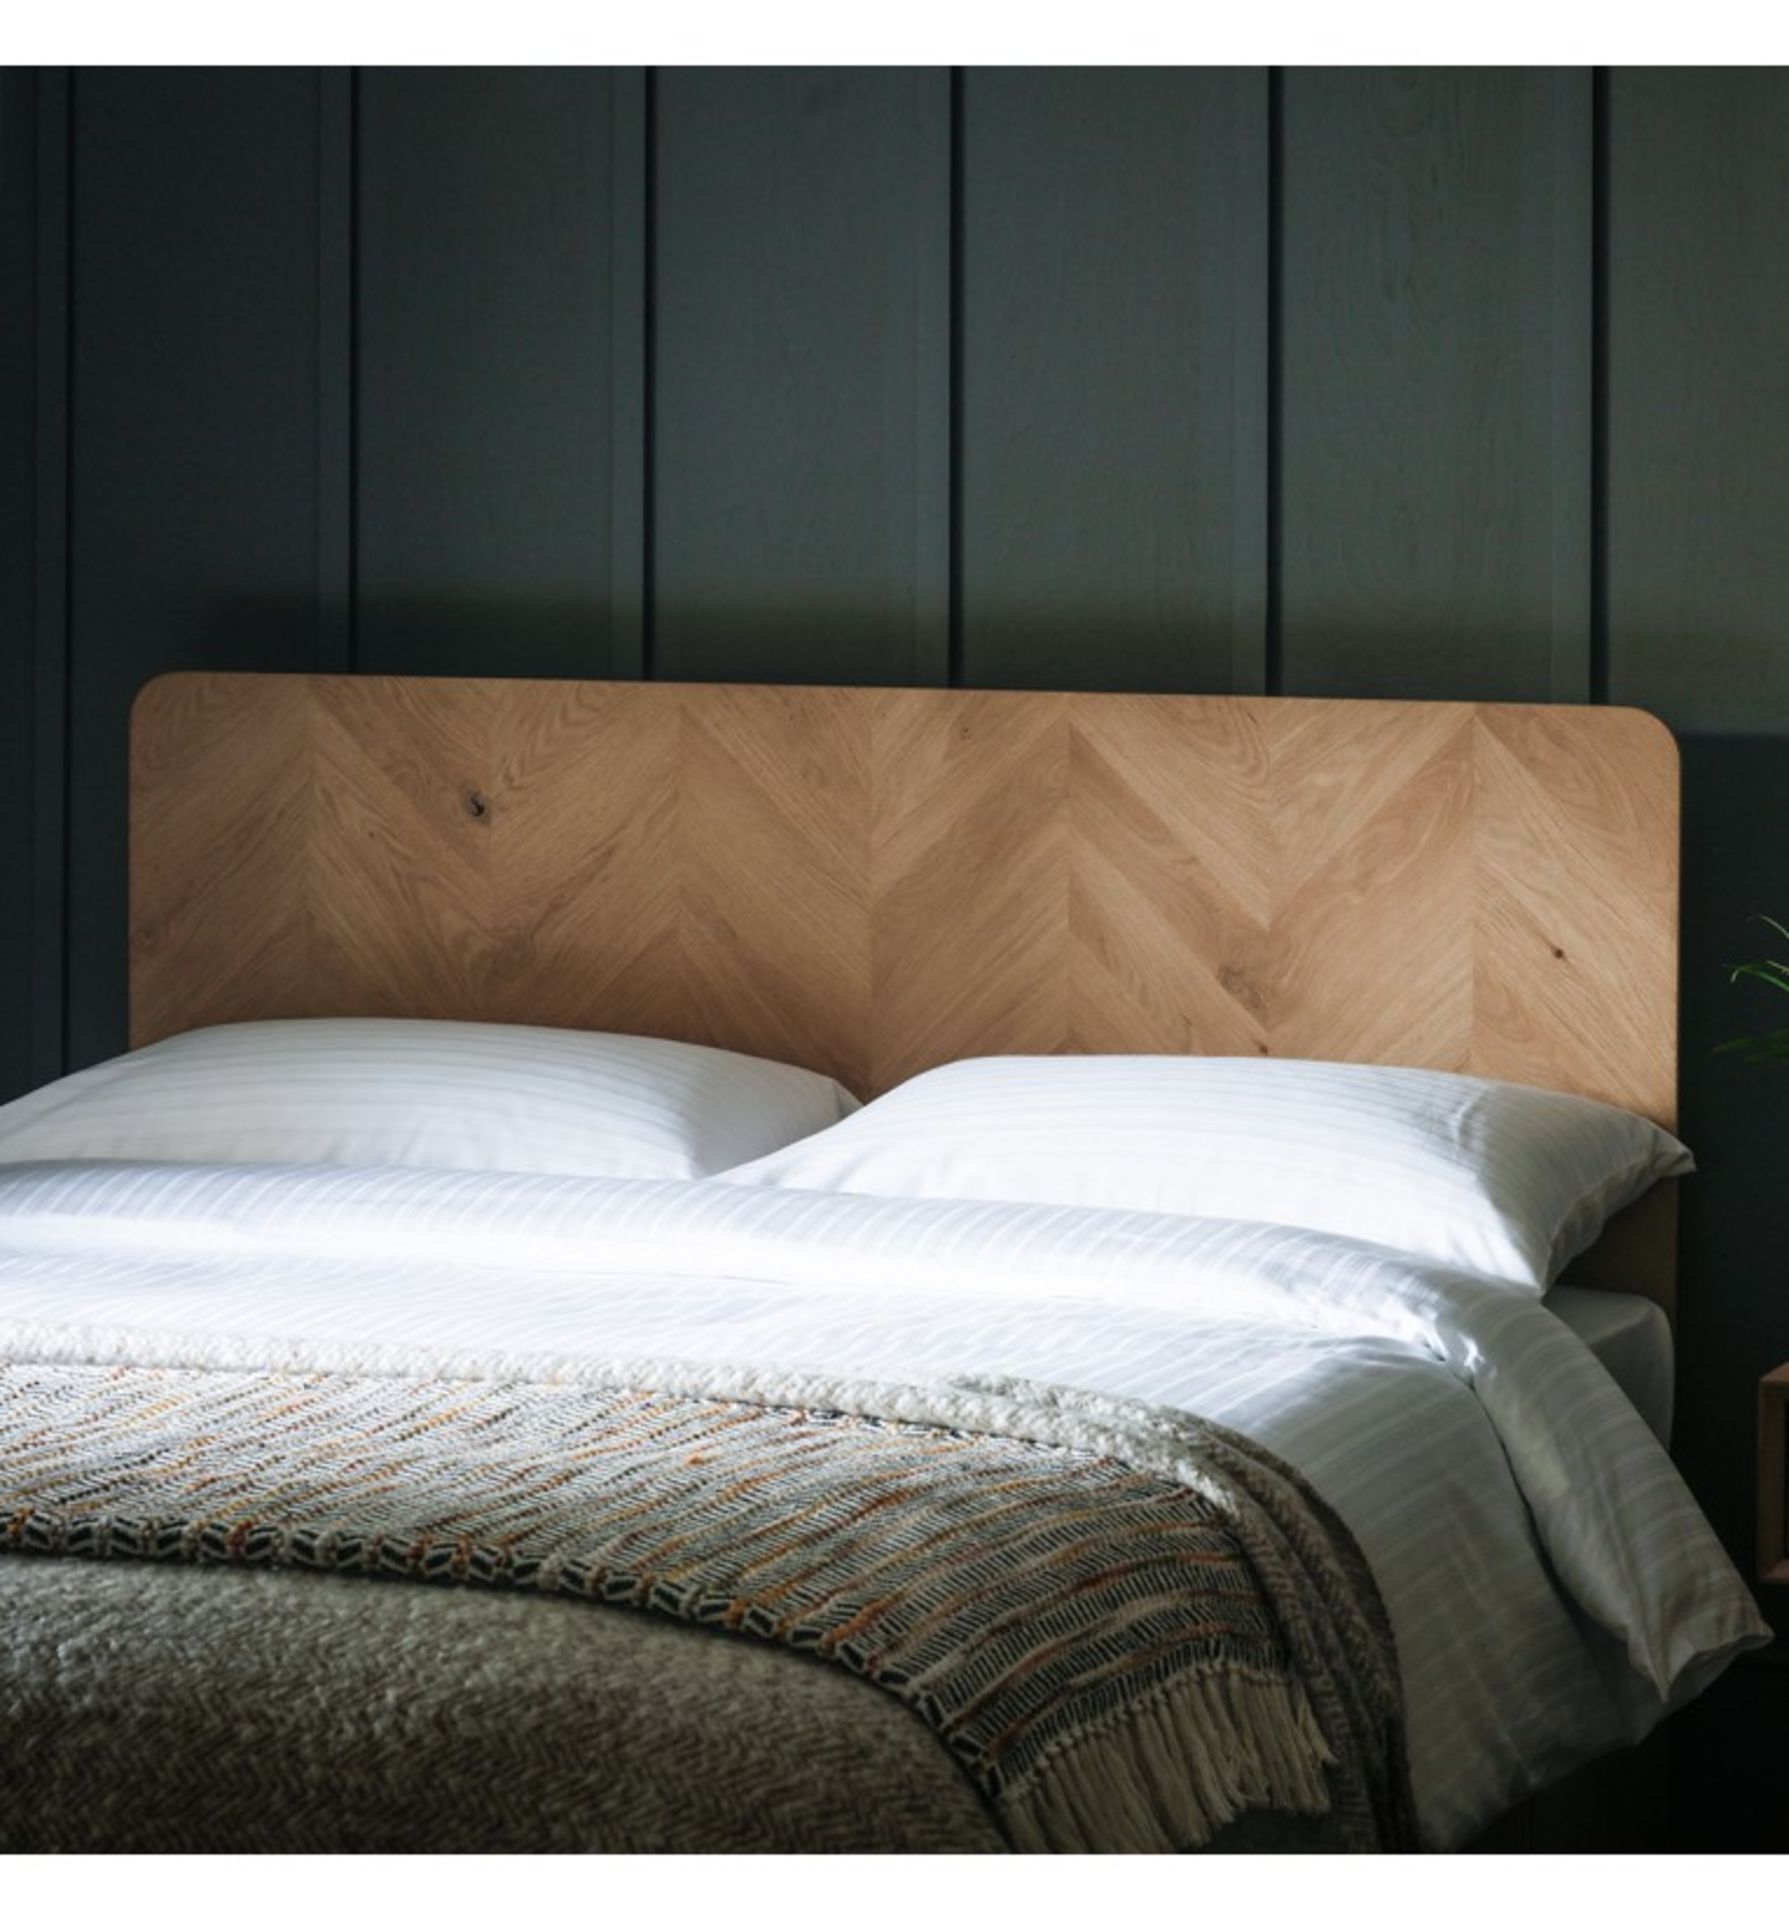 Milano Headboard Stunning Milano headboard suitable for a super kingsize bed. It features a